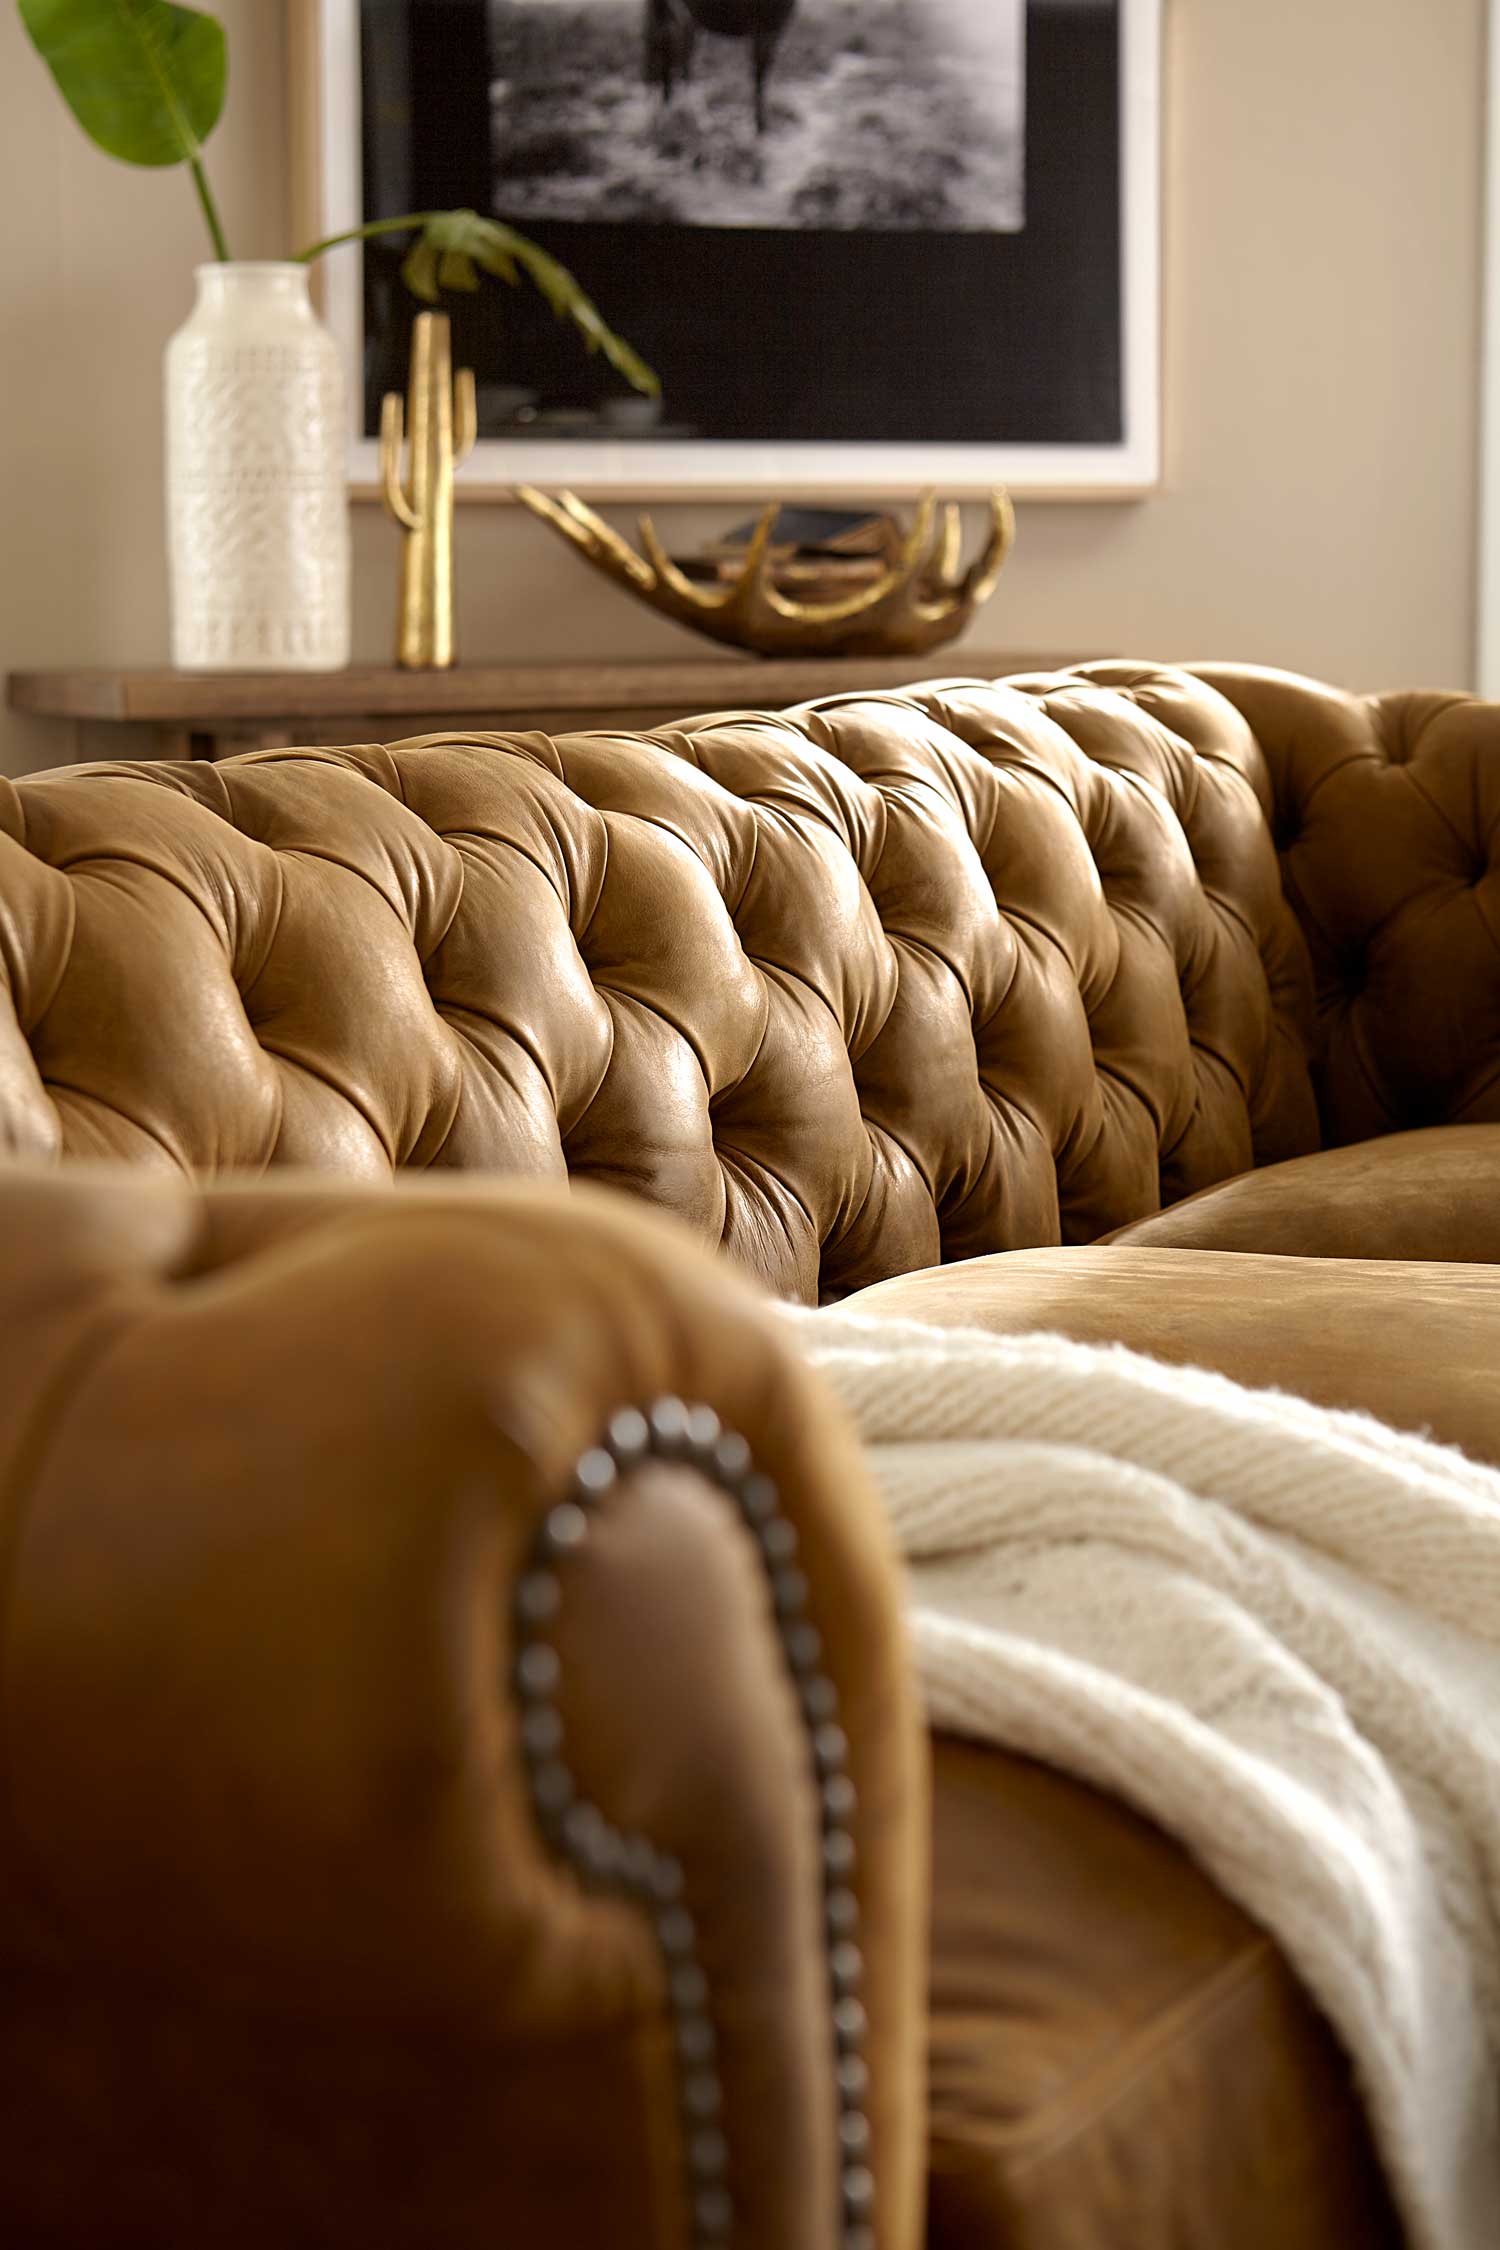 custom leather furniture traditional Tufted Deep Leather Sofas with nail head accent and a natural light brown leather